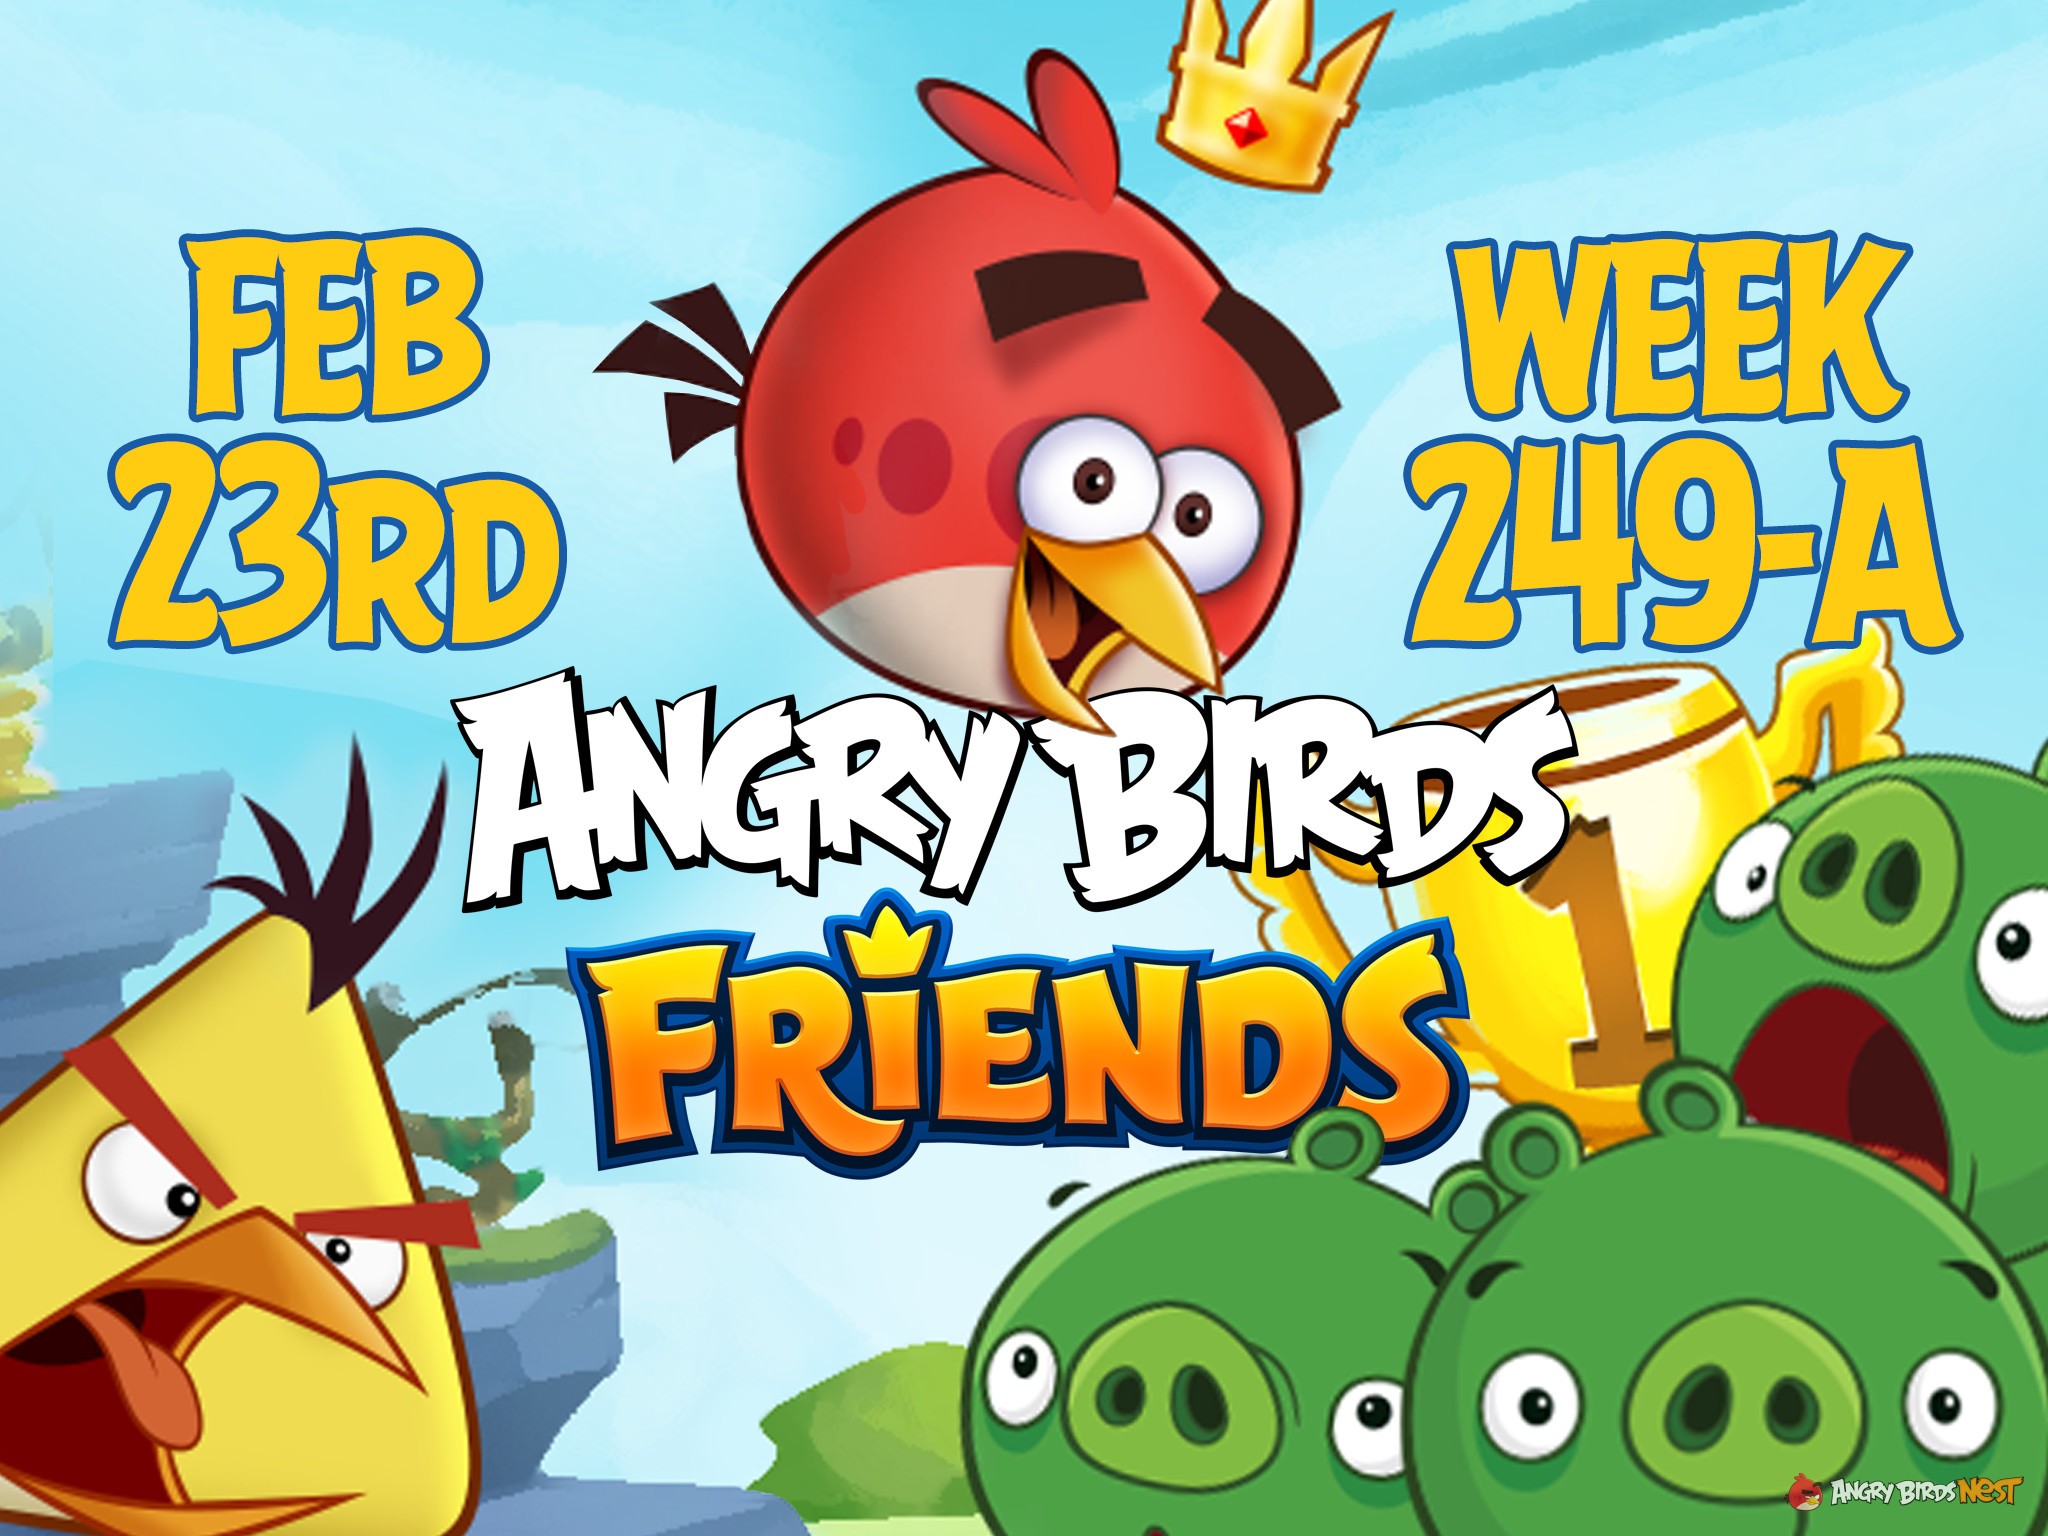 Angry Birds Friends Tournament Week 249-A Feature Image